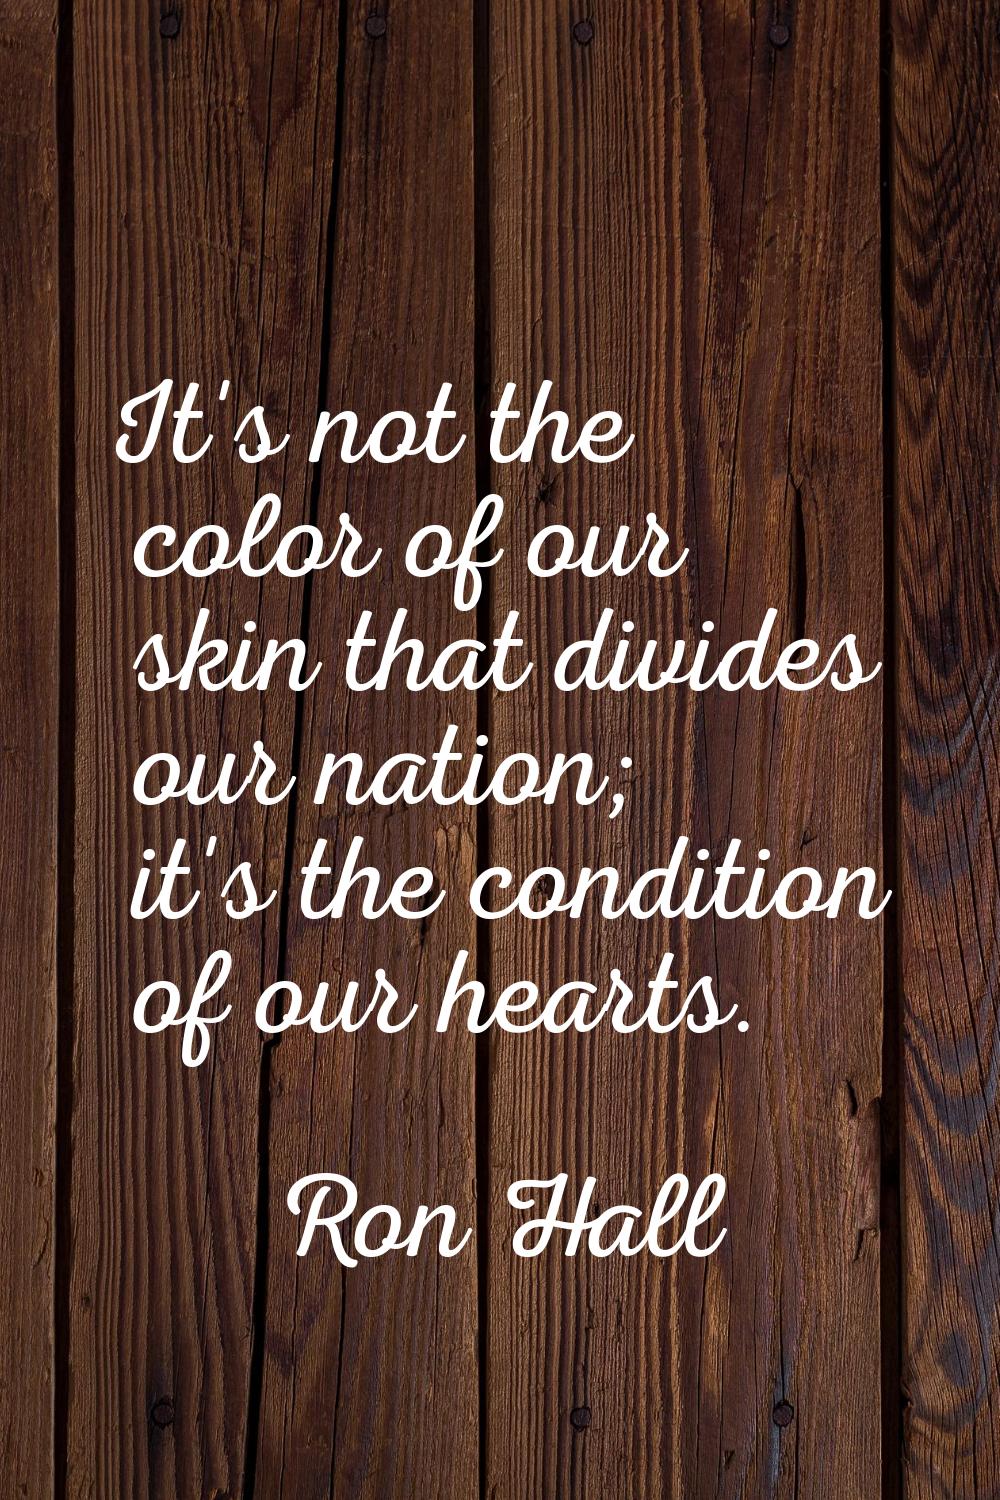 It's not the color of our skin that divides our nation; it's the condition of our hearts.